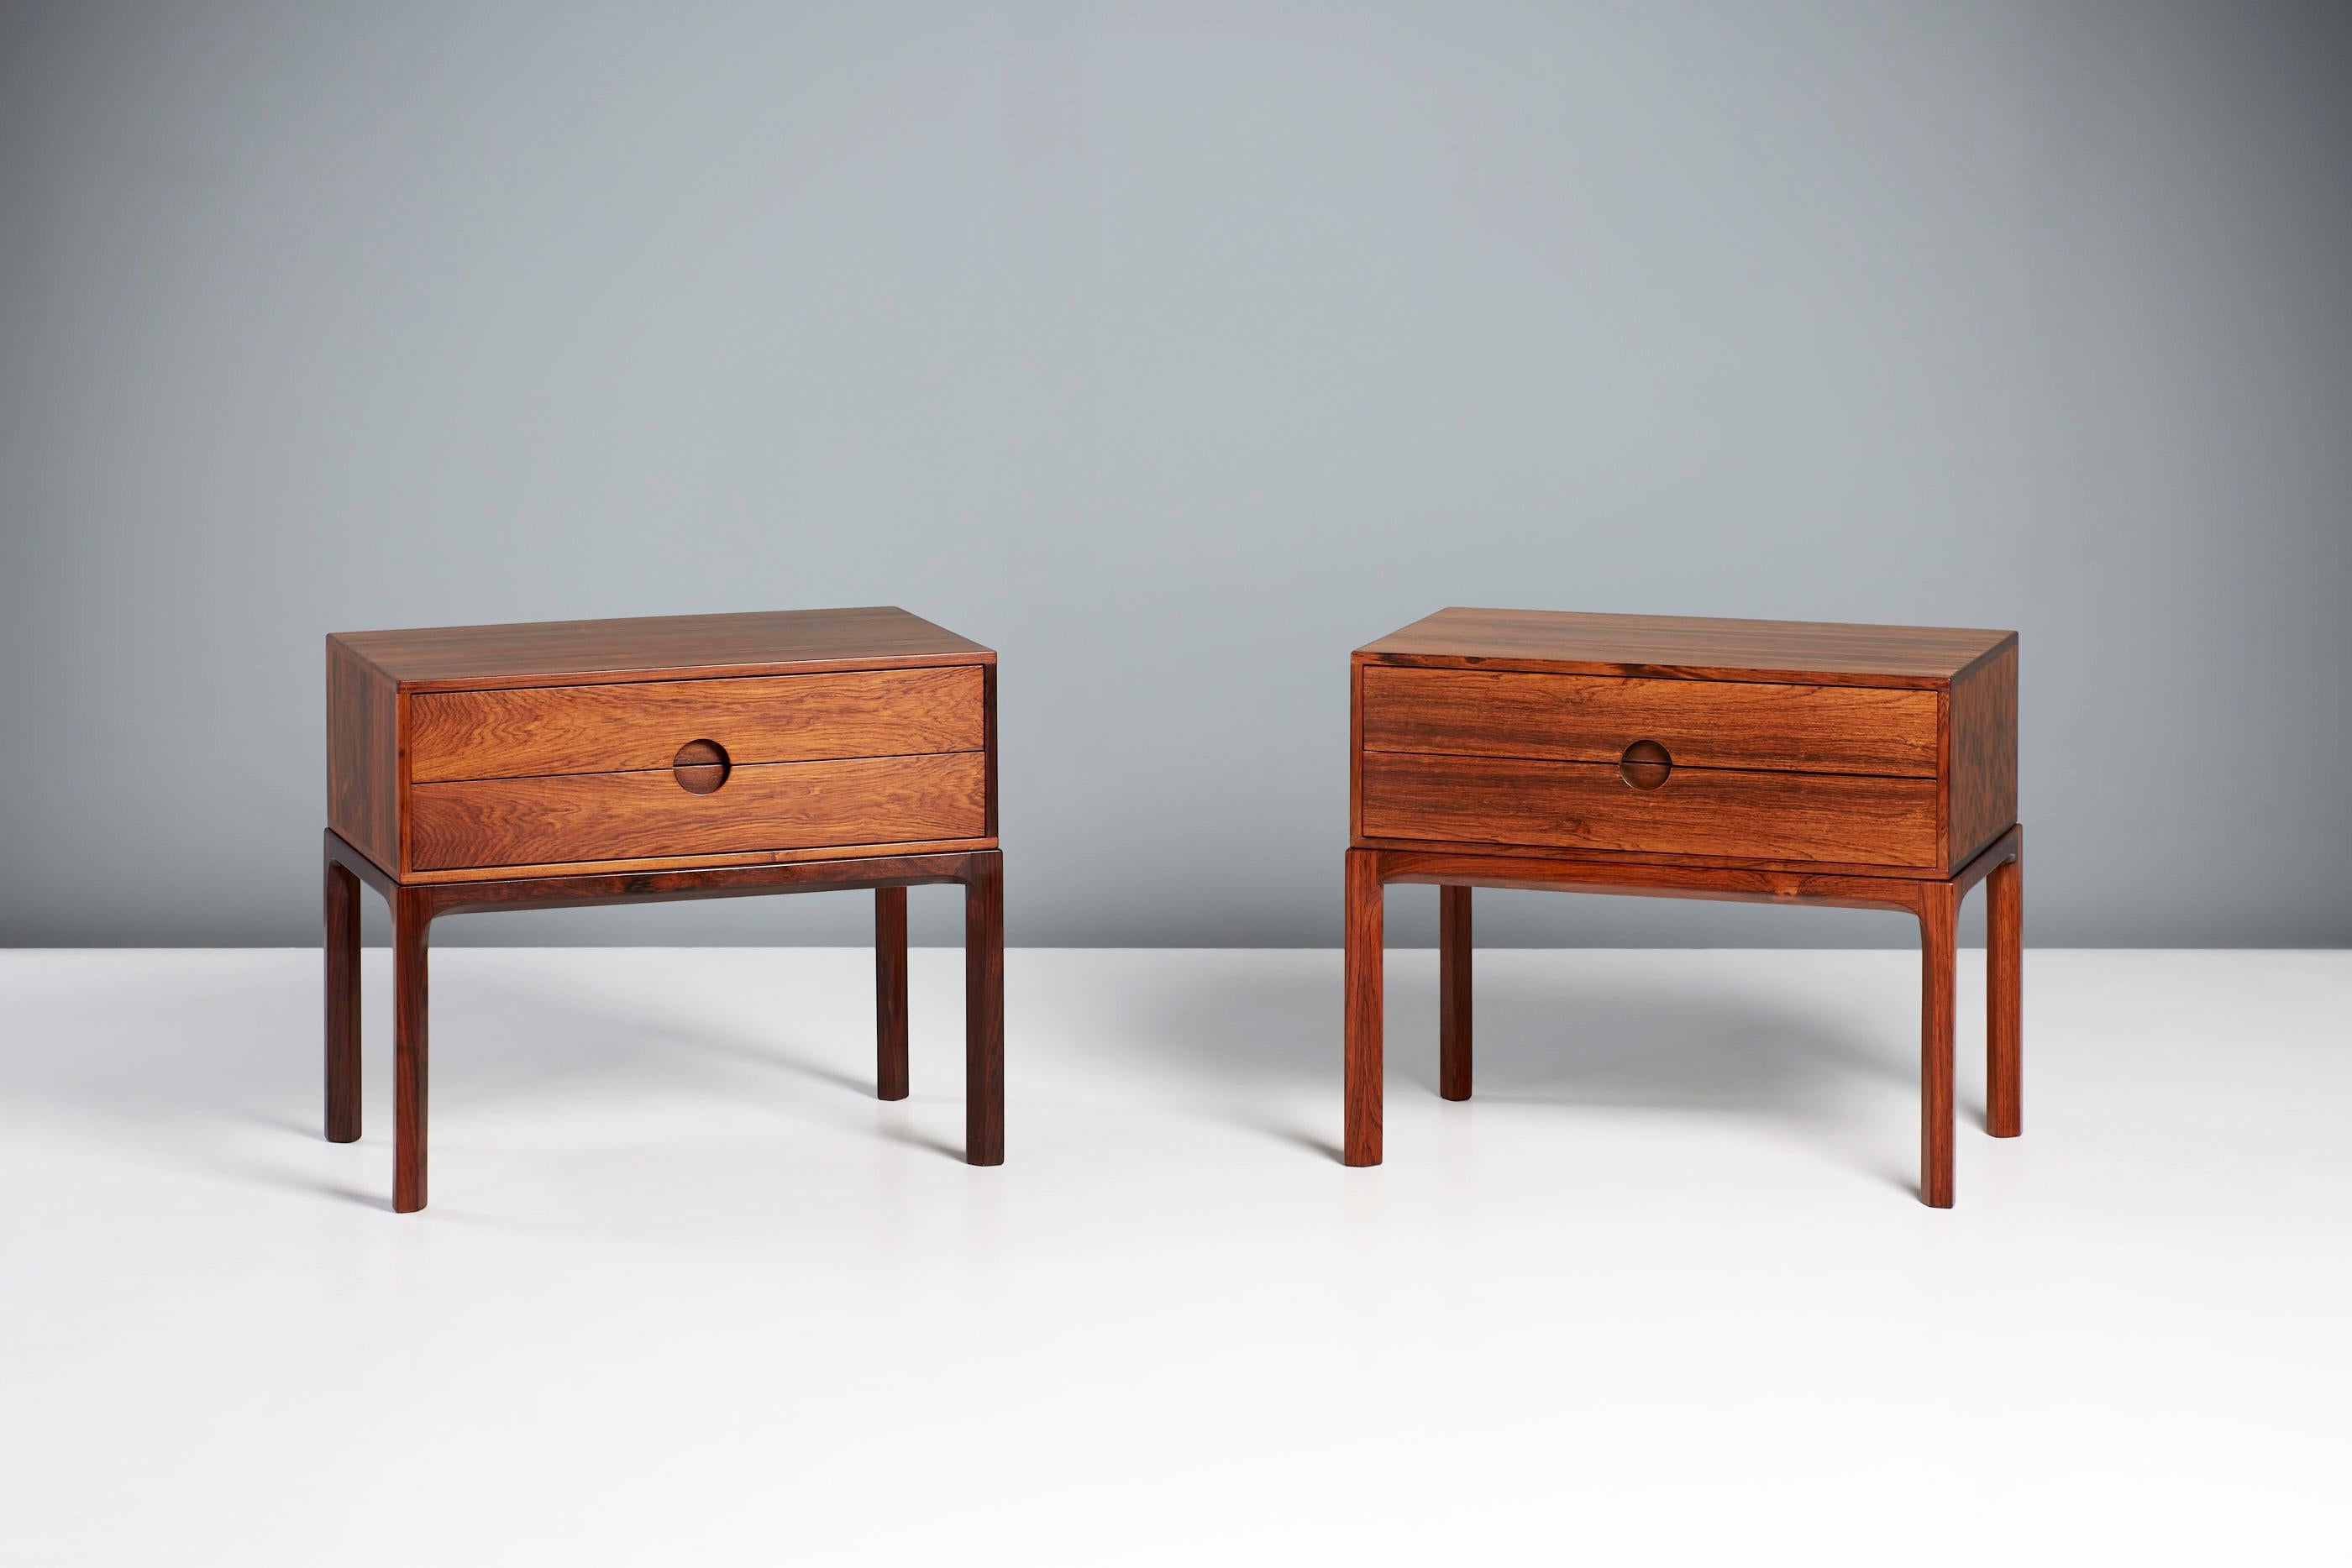 Kai Kristiansen - Model 384 Rosewood Nightstands, c1950s

A pair of exquisite rosewood bedside cabinets, produced by cabinetmaker Aksel Kjaersgaard in Odder, Denmark circa 1950s. This design was part of Kai Kristiansen's iconic 'Entre' series of